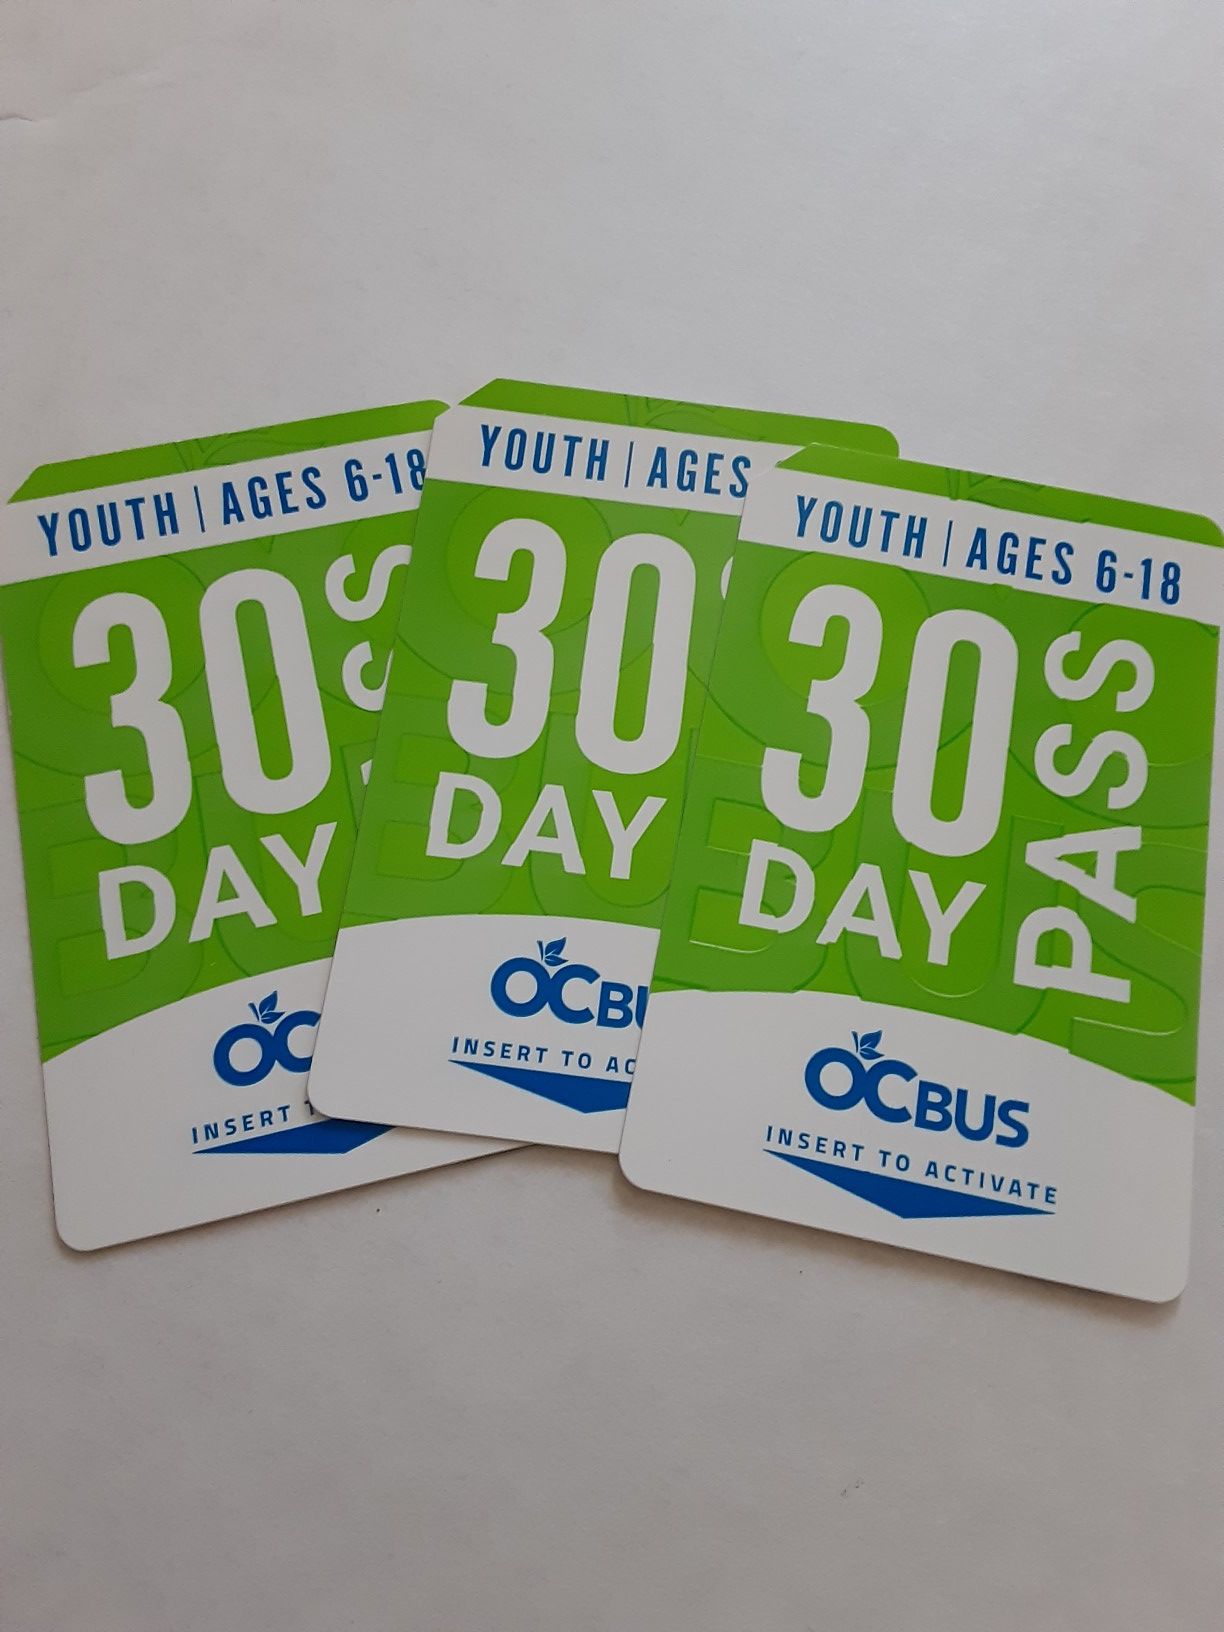 30 DAY OCTA YOUTH BUS PASSES